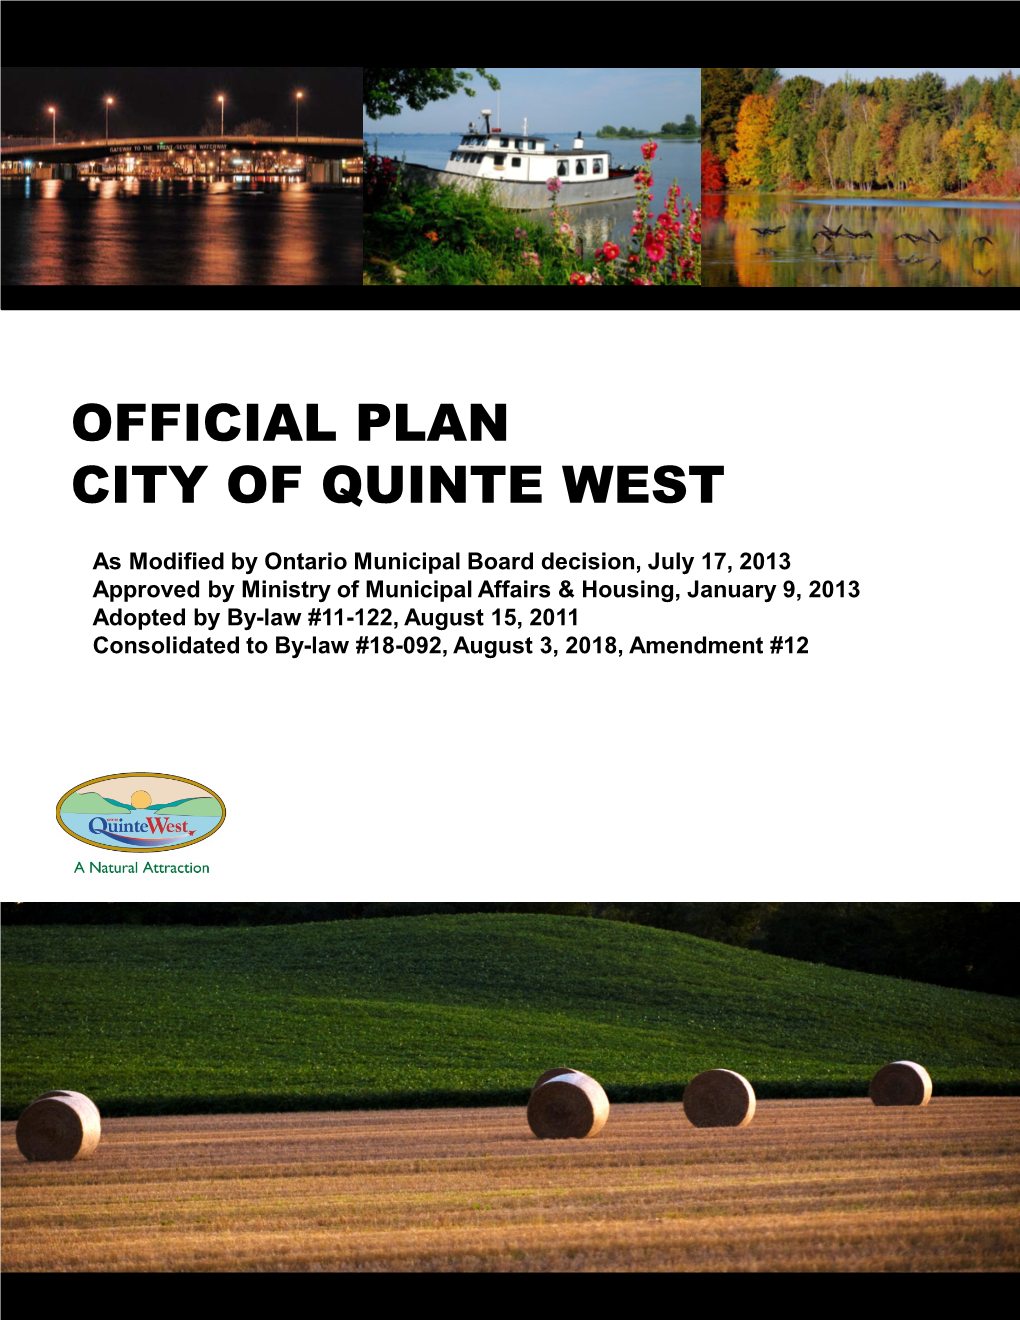 The City of Quinte West Official Plan (2013)